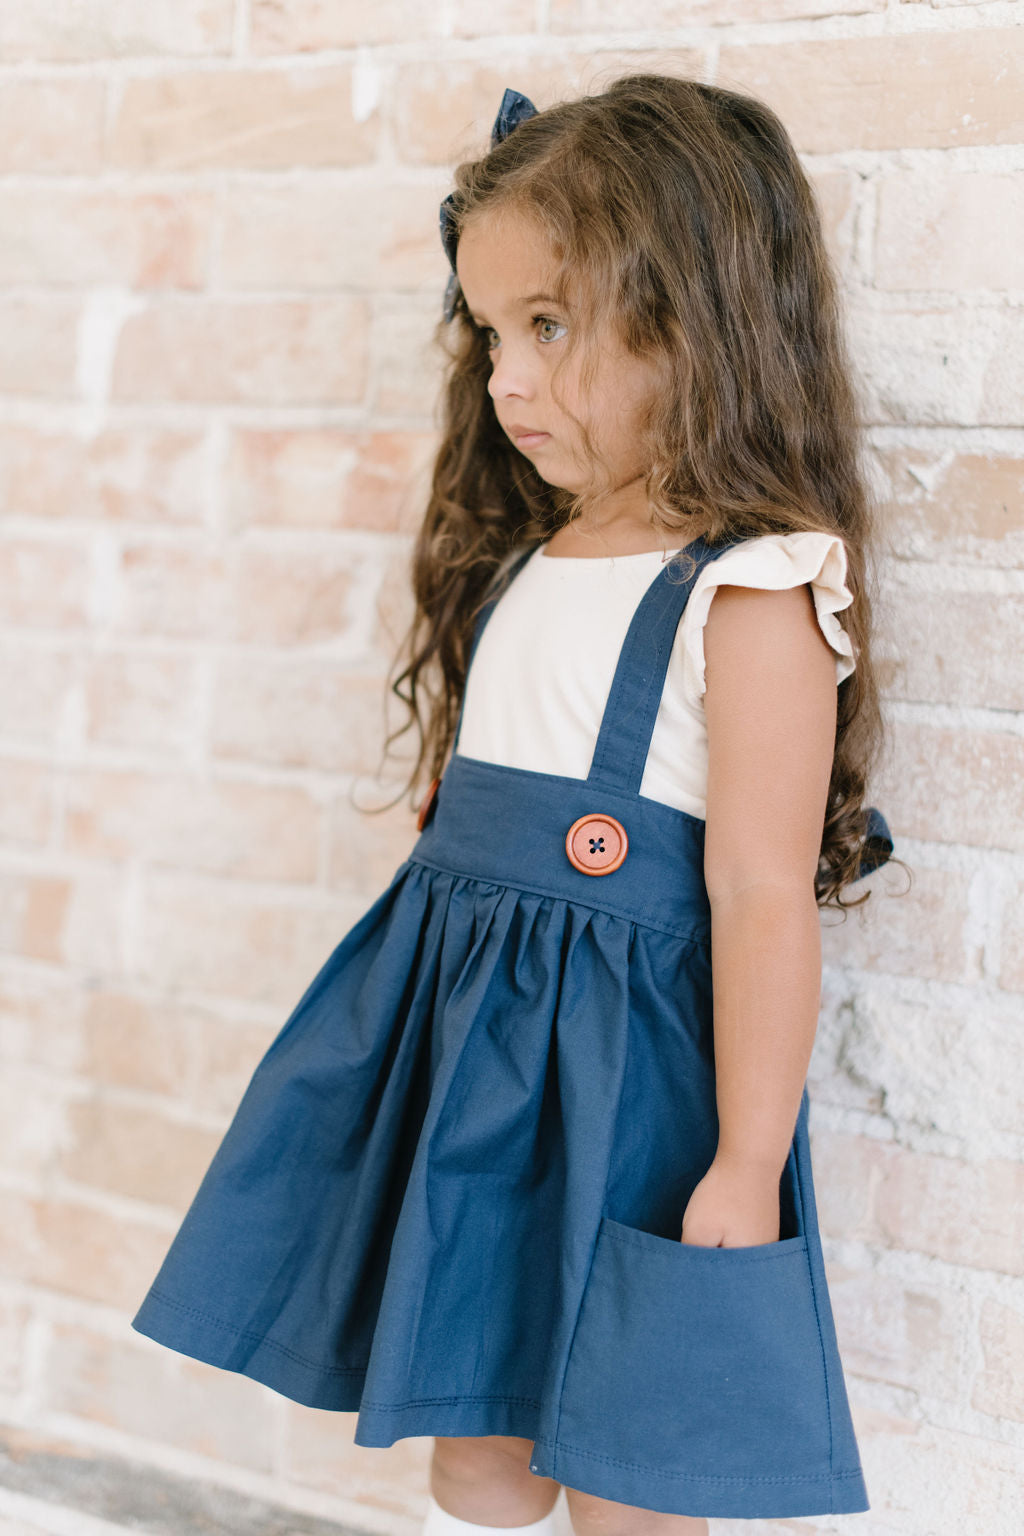 Savannah Suspender Skirt in ‘Buttercup Belle'- Ready to Ship